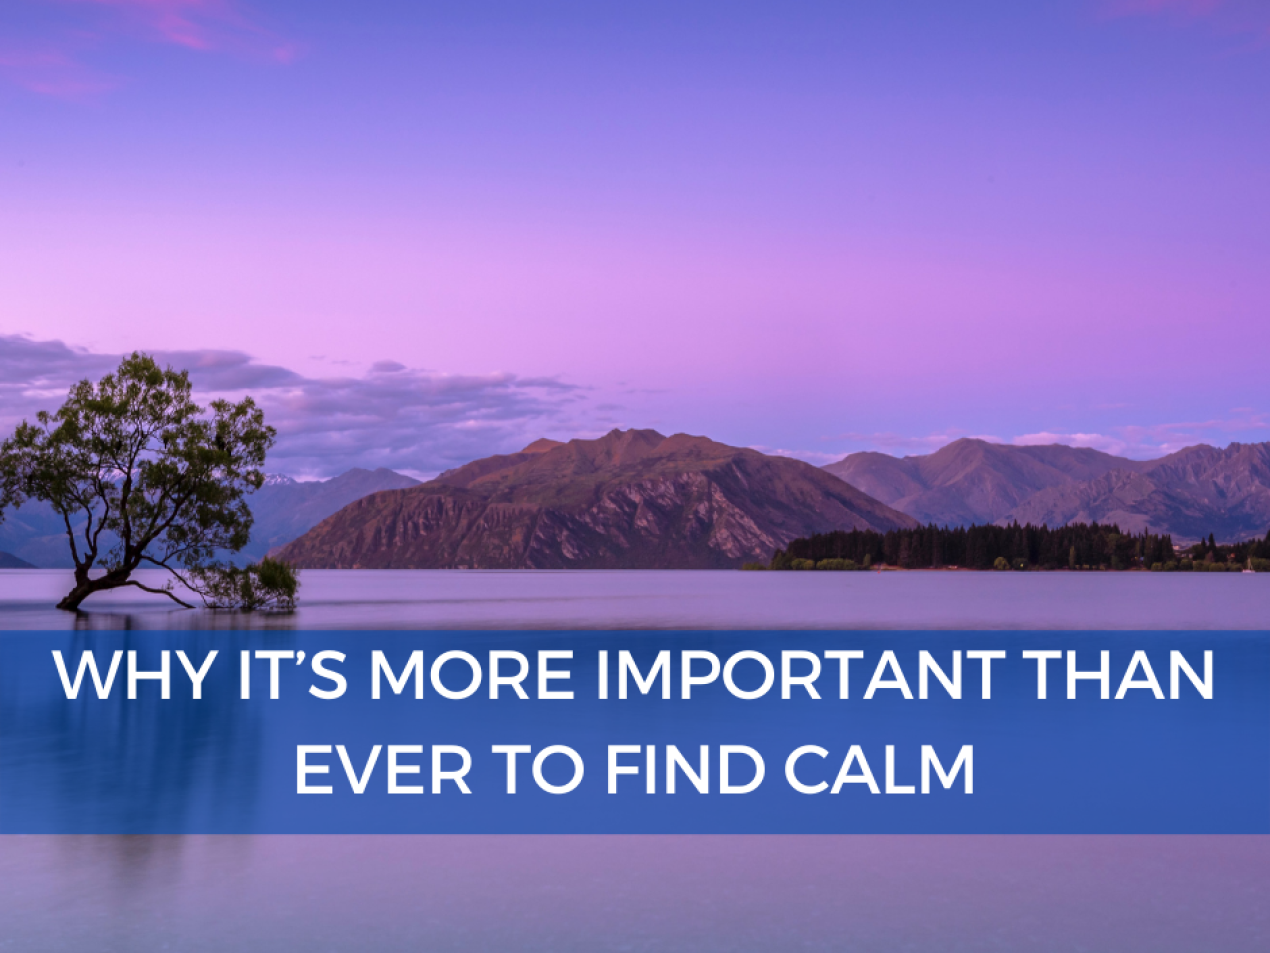 Why it’s More Important than Ever to Find Calm